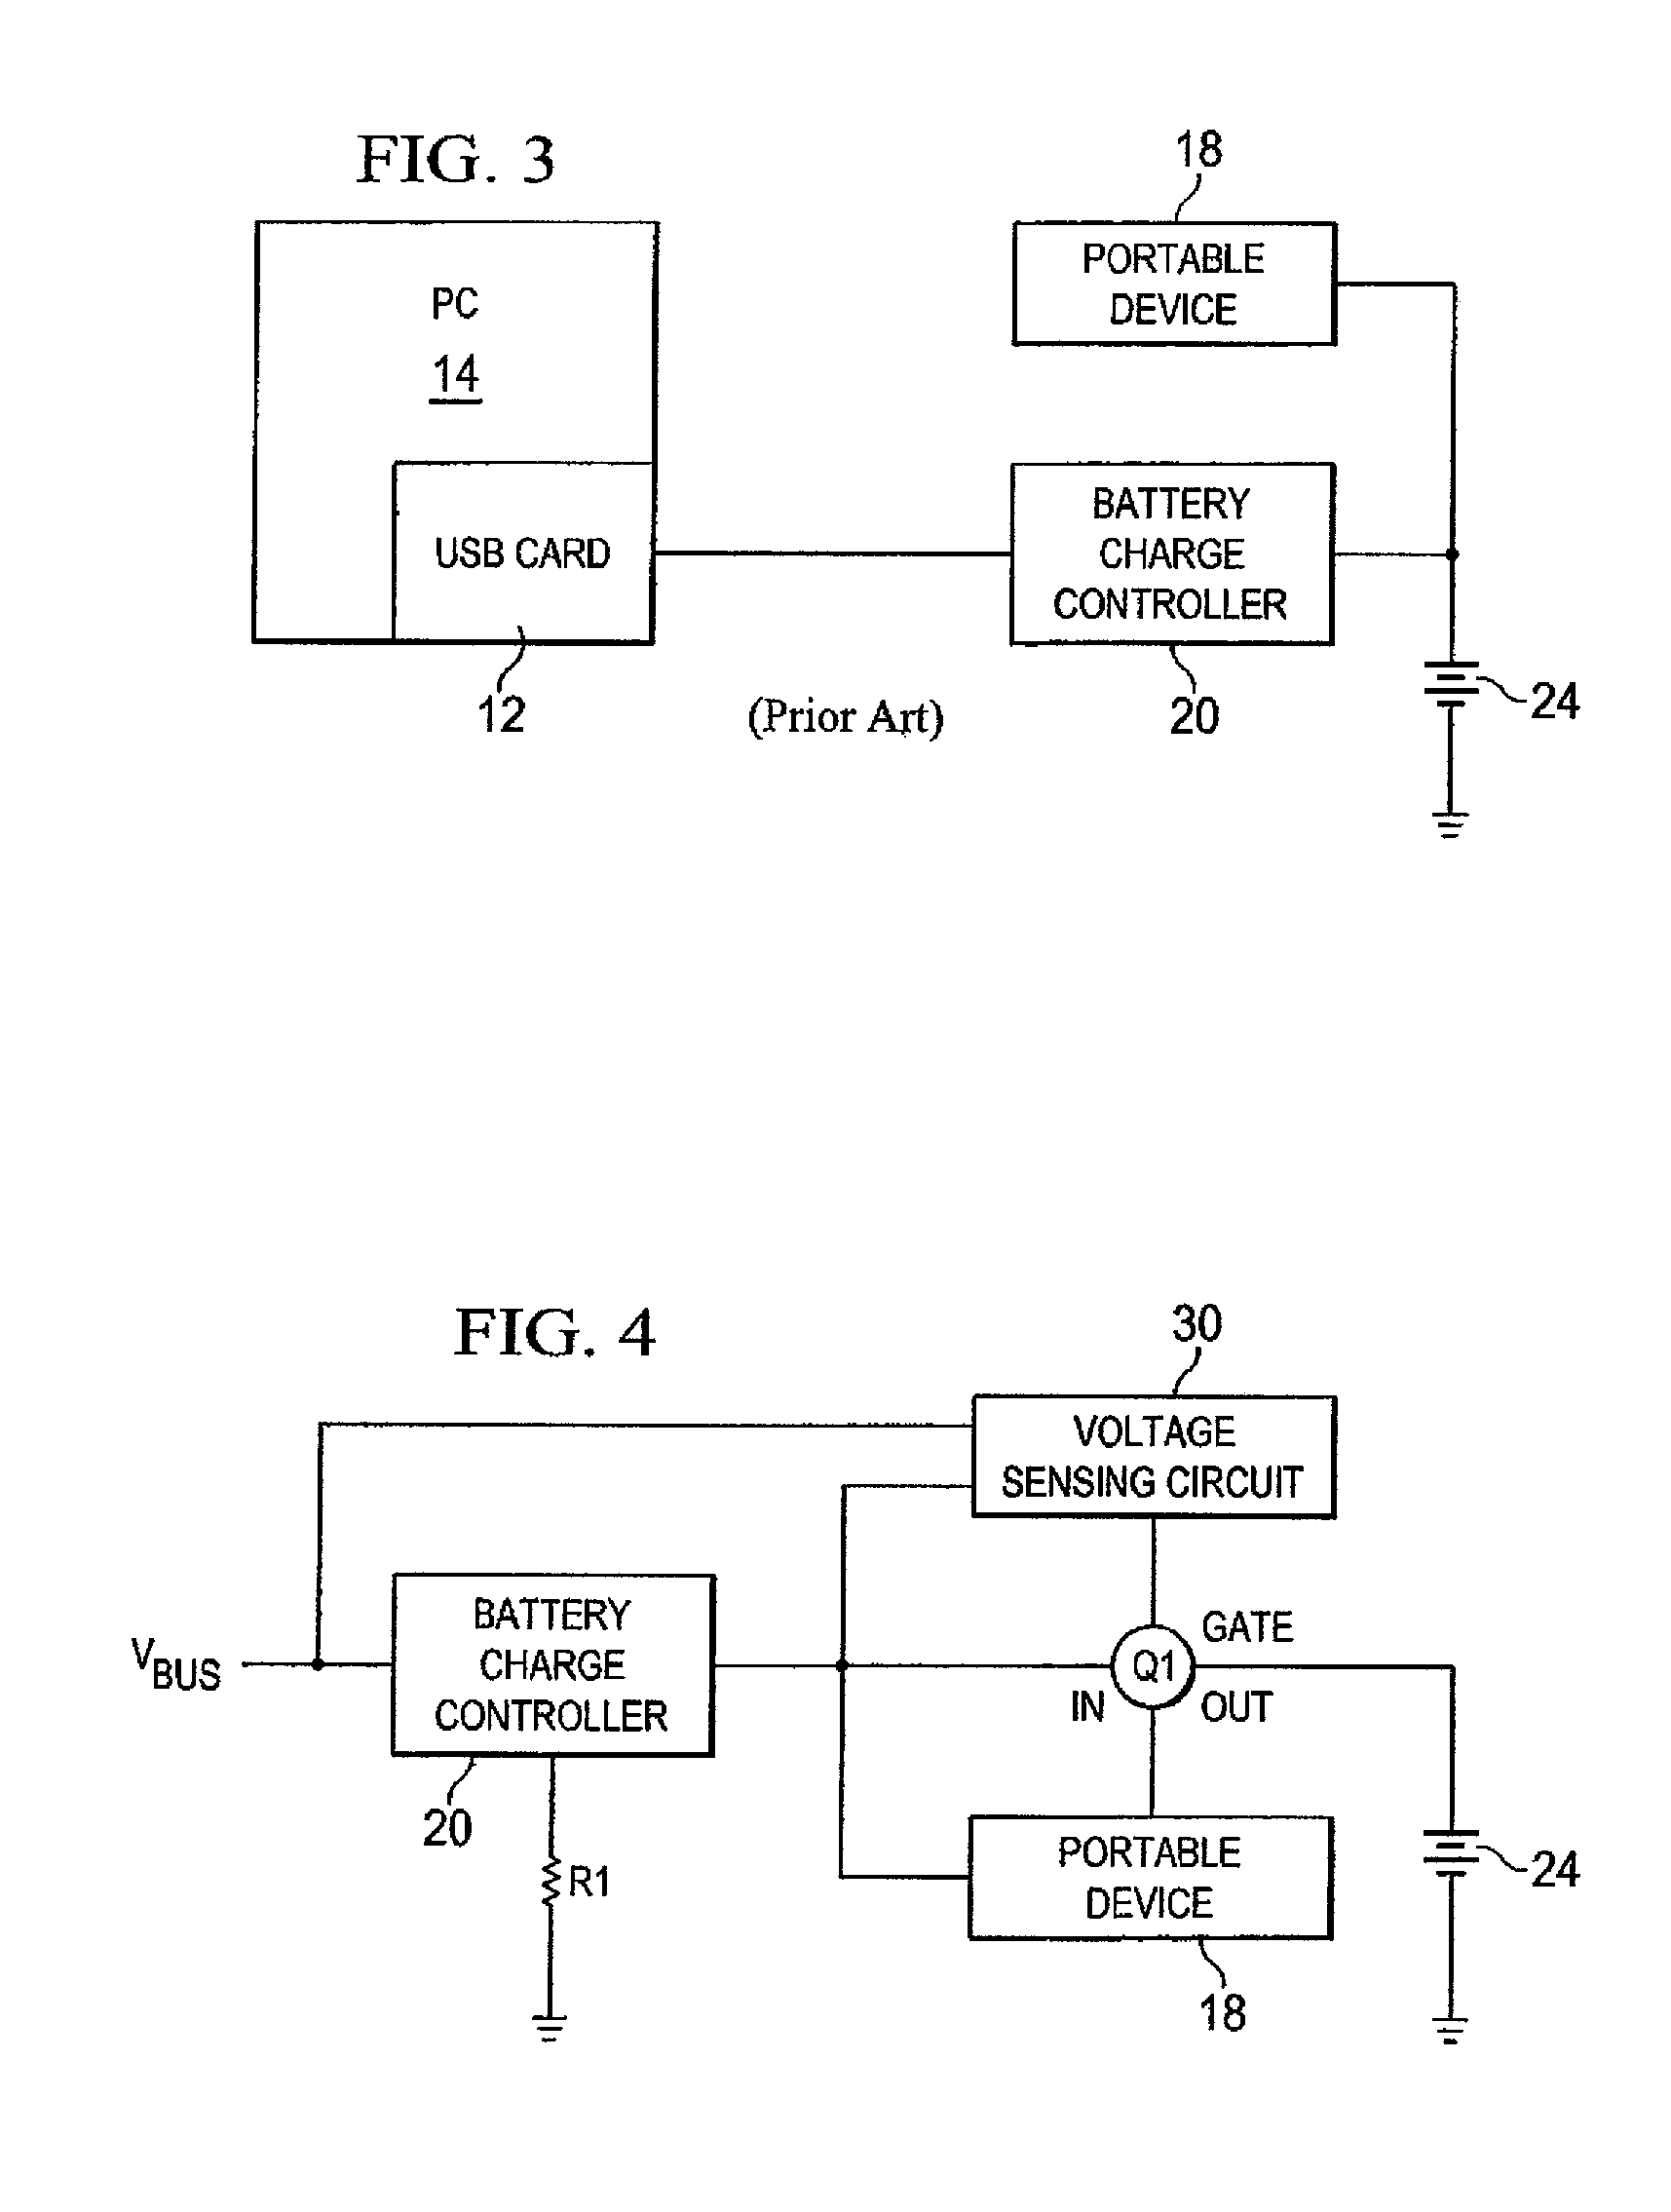 Circuit and method of operation for an electrical power supply